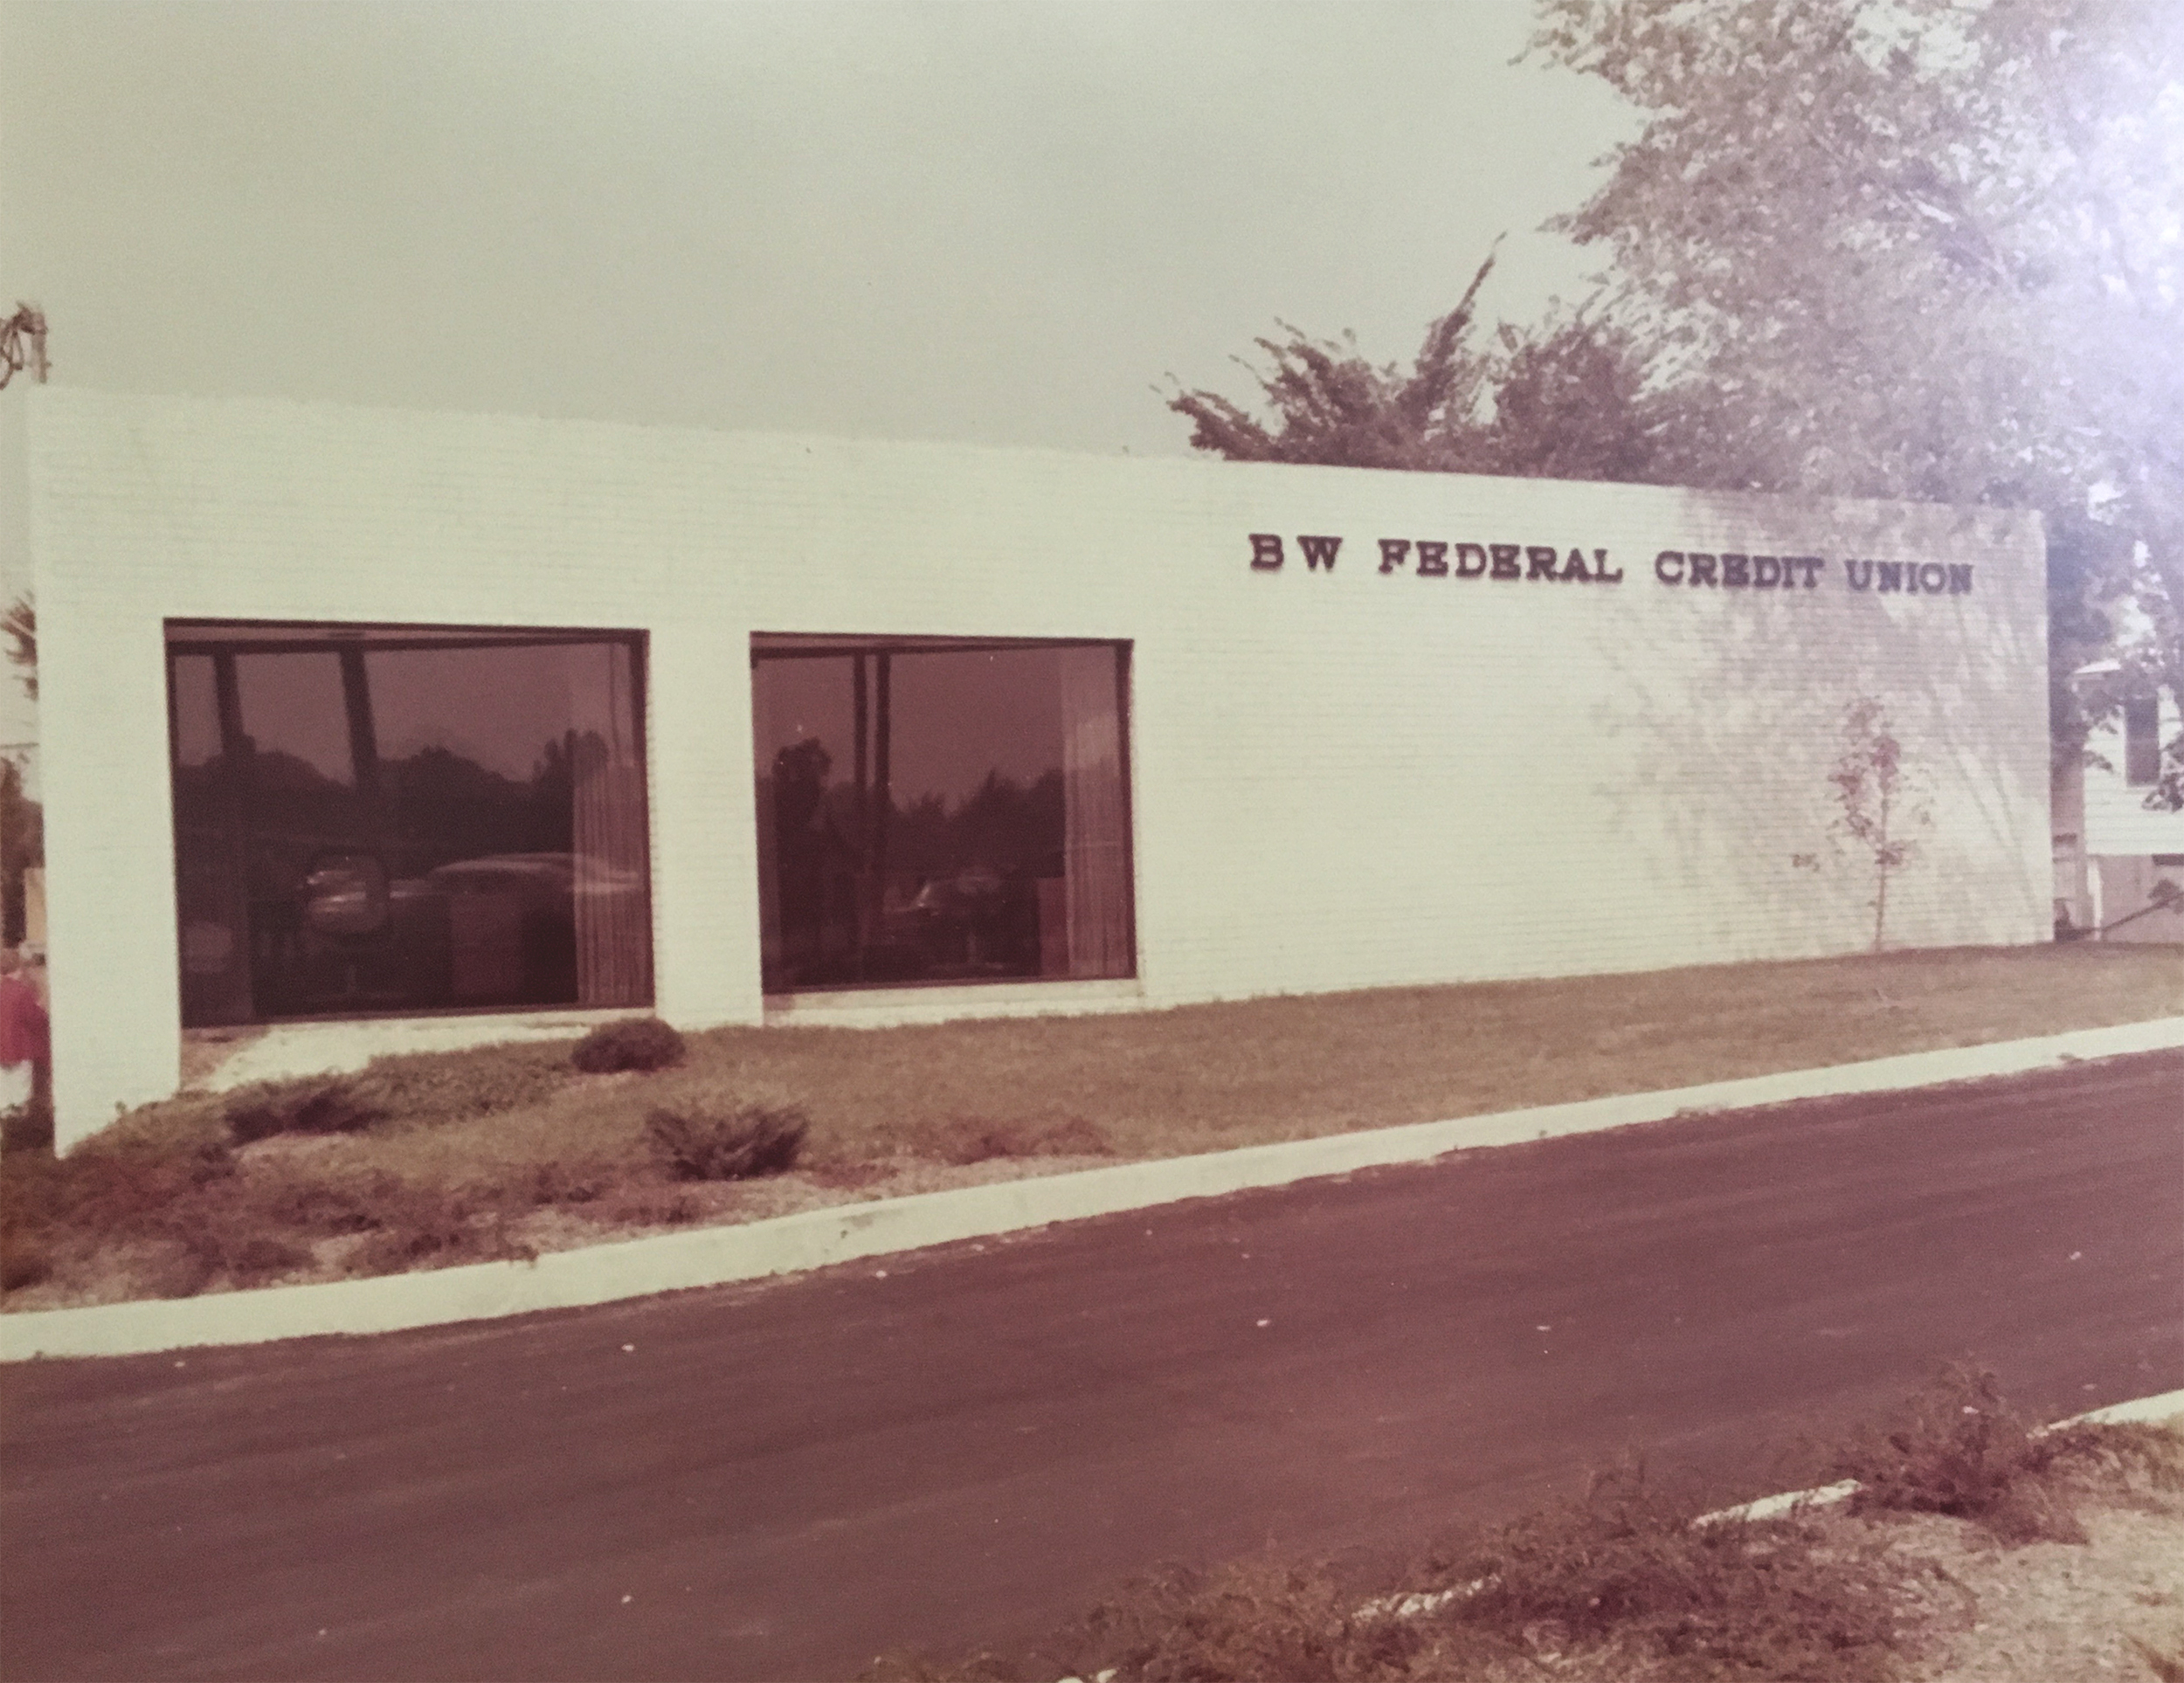 Image: Old photo of BWFCU